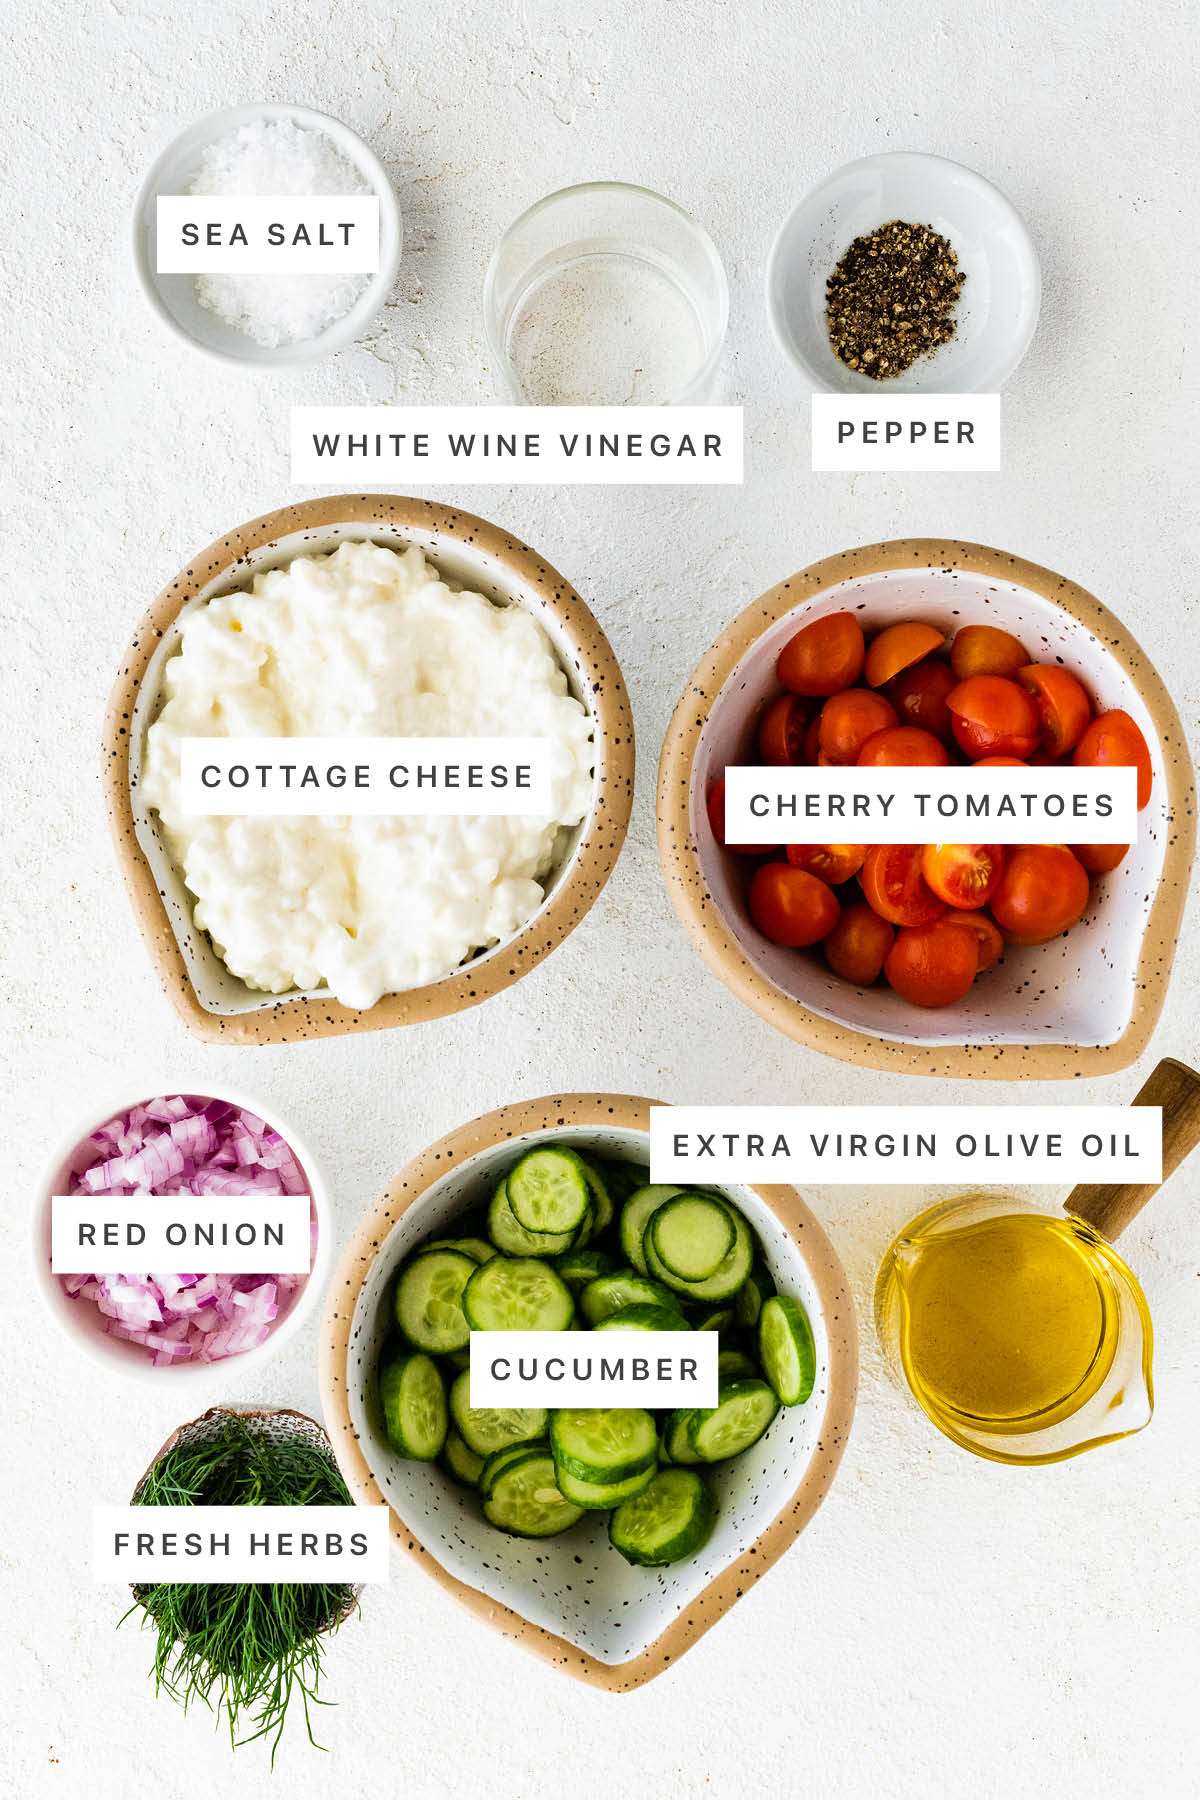 Ingredients measured out to make Cottage Cheese Salad: salt, white wine vinegar, pepper, cottage cheese, cherry tomatoes, red onion, cucumber, extra virgin olive oil and fresh herbs.